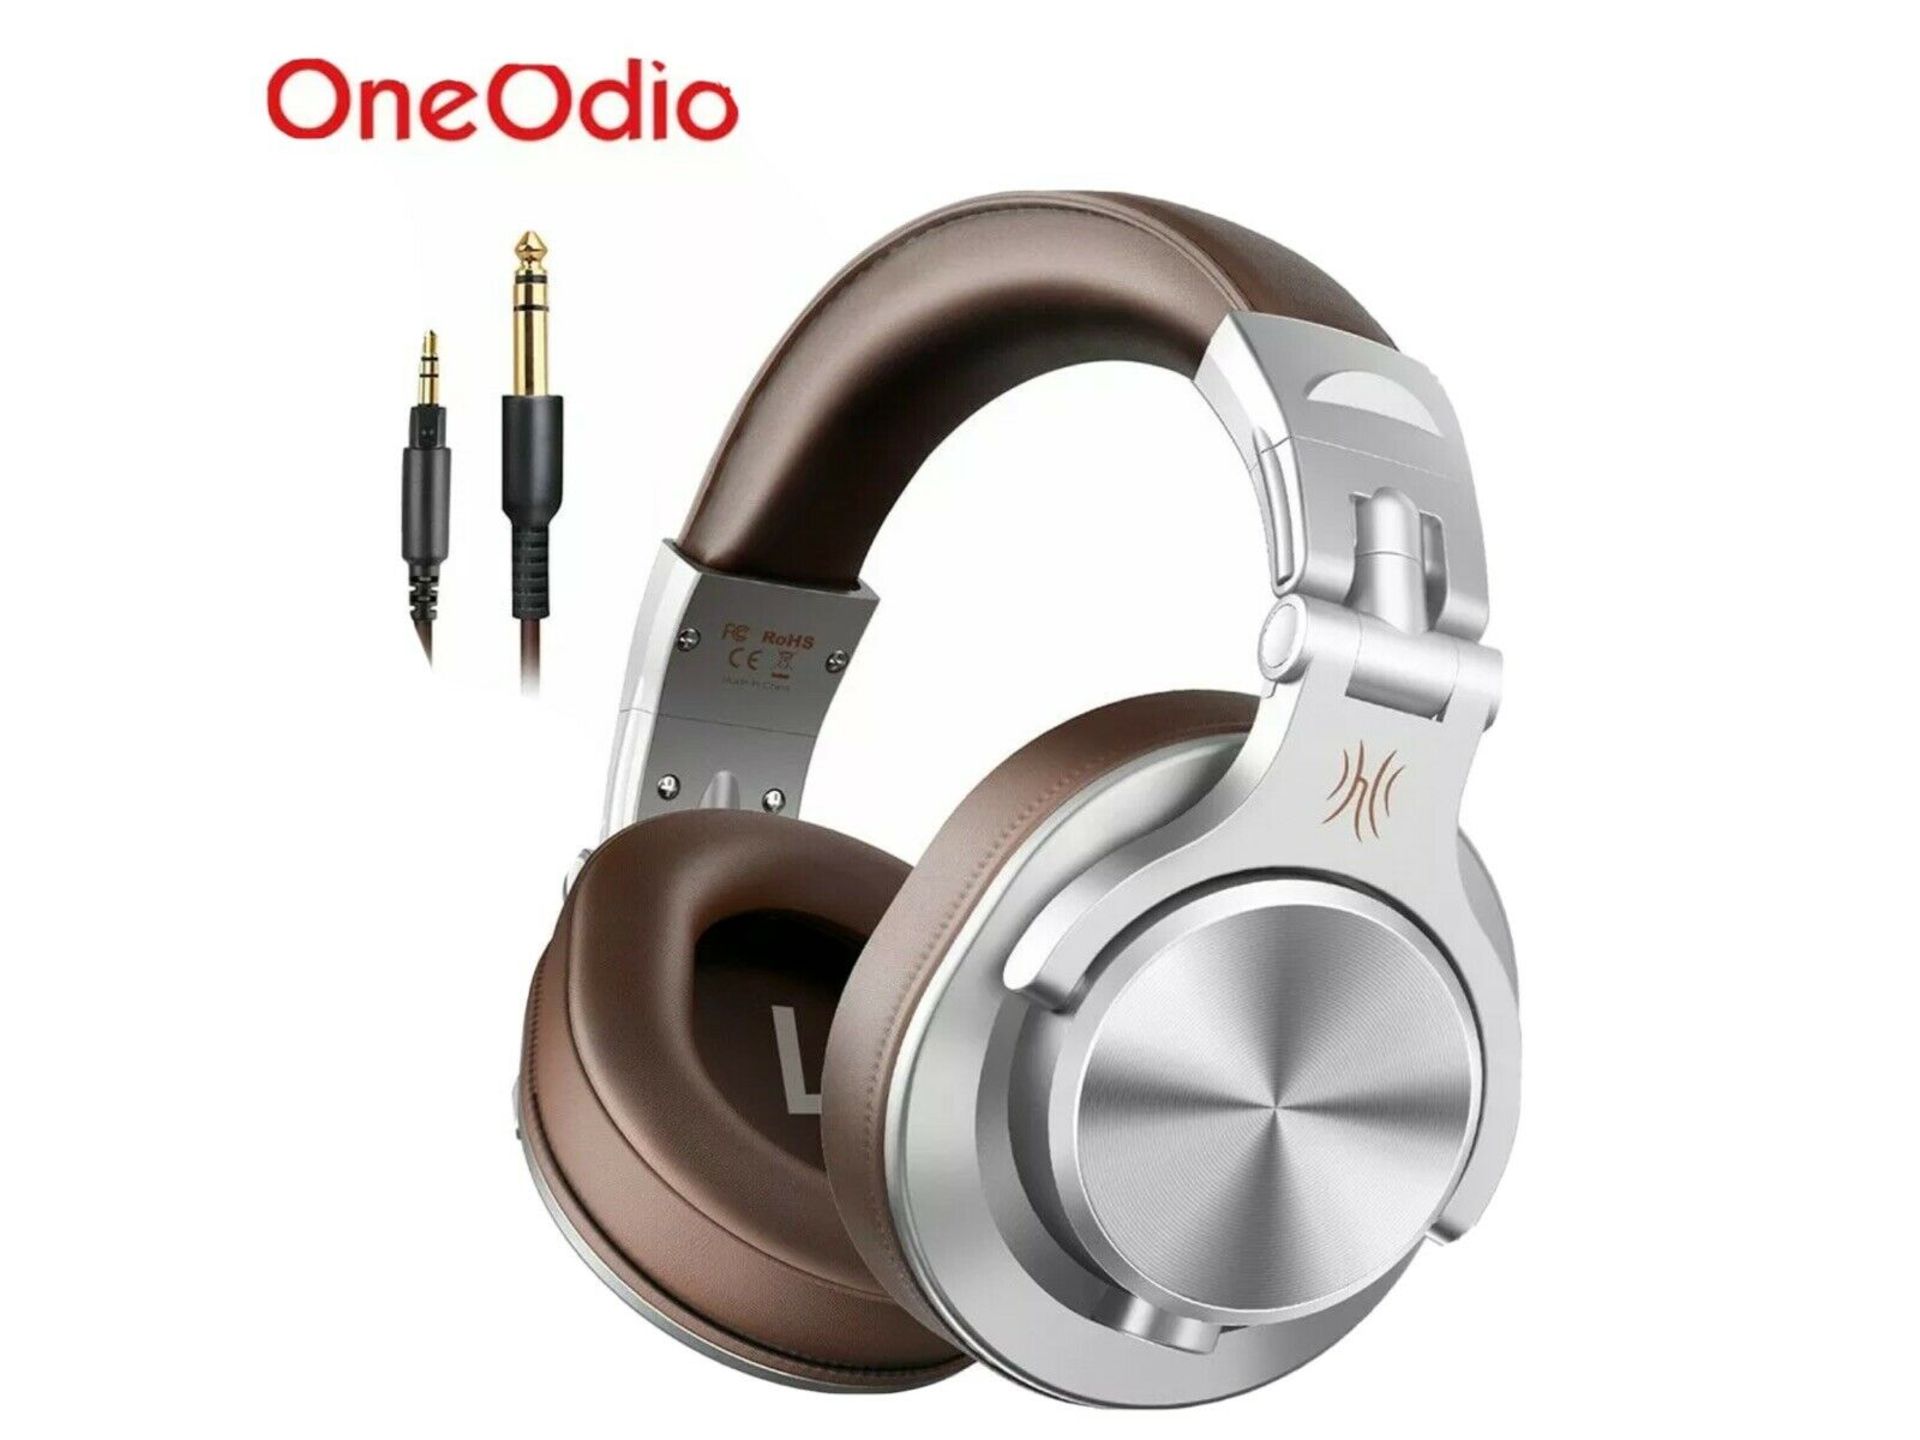 New 2020 Stock OneOdio Fusion A70 Bluetooth/Wired Over Ear Hi Fi DJ Headphones Upgraded chip Version